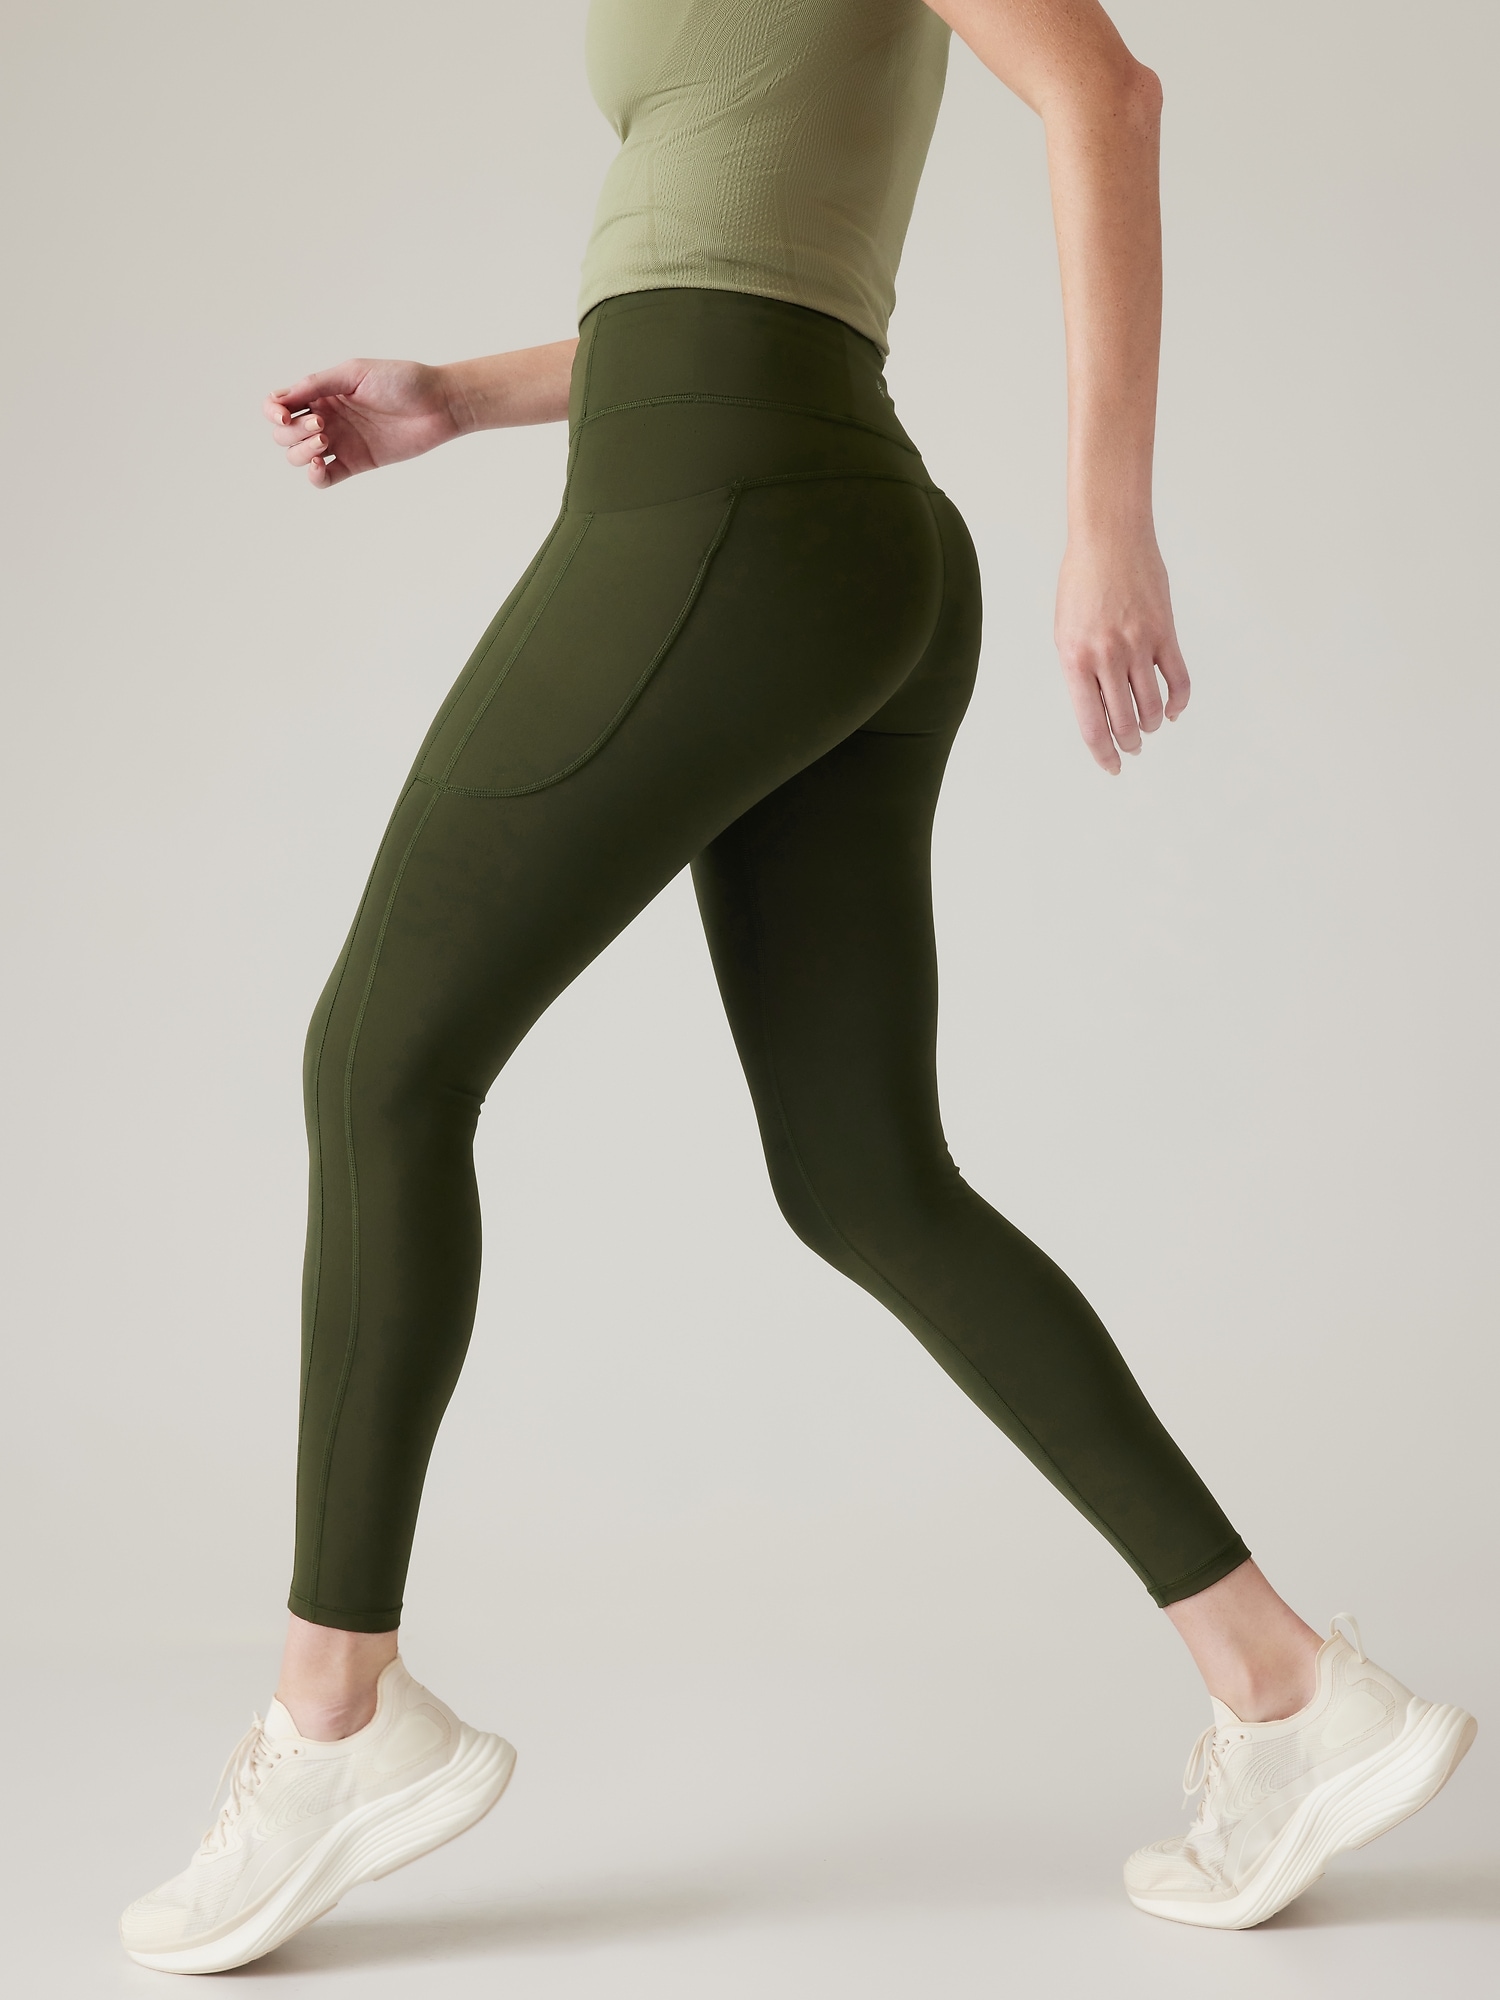 Athleta Ultimate Stash Pocket 7/8 Tight in SuperSonic,OLIVE SIZE SP #531262  T08